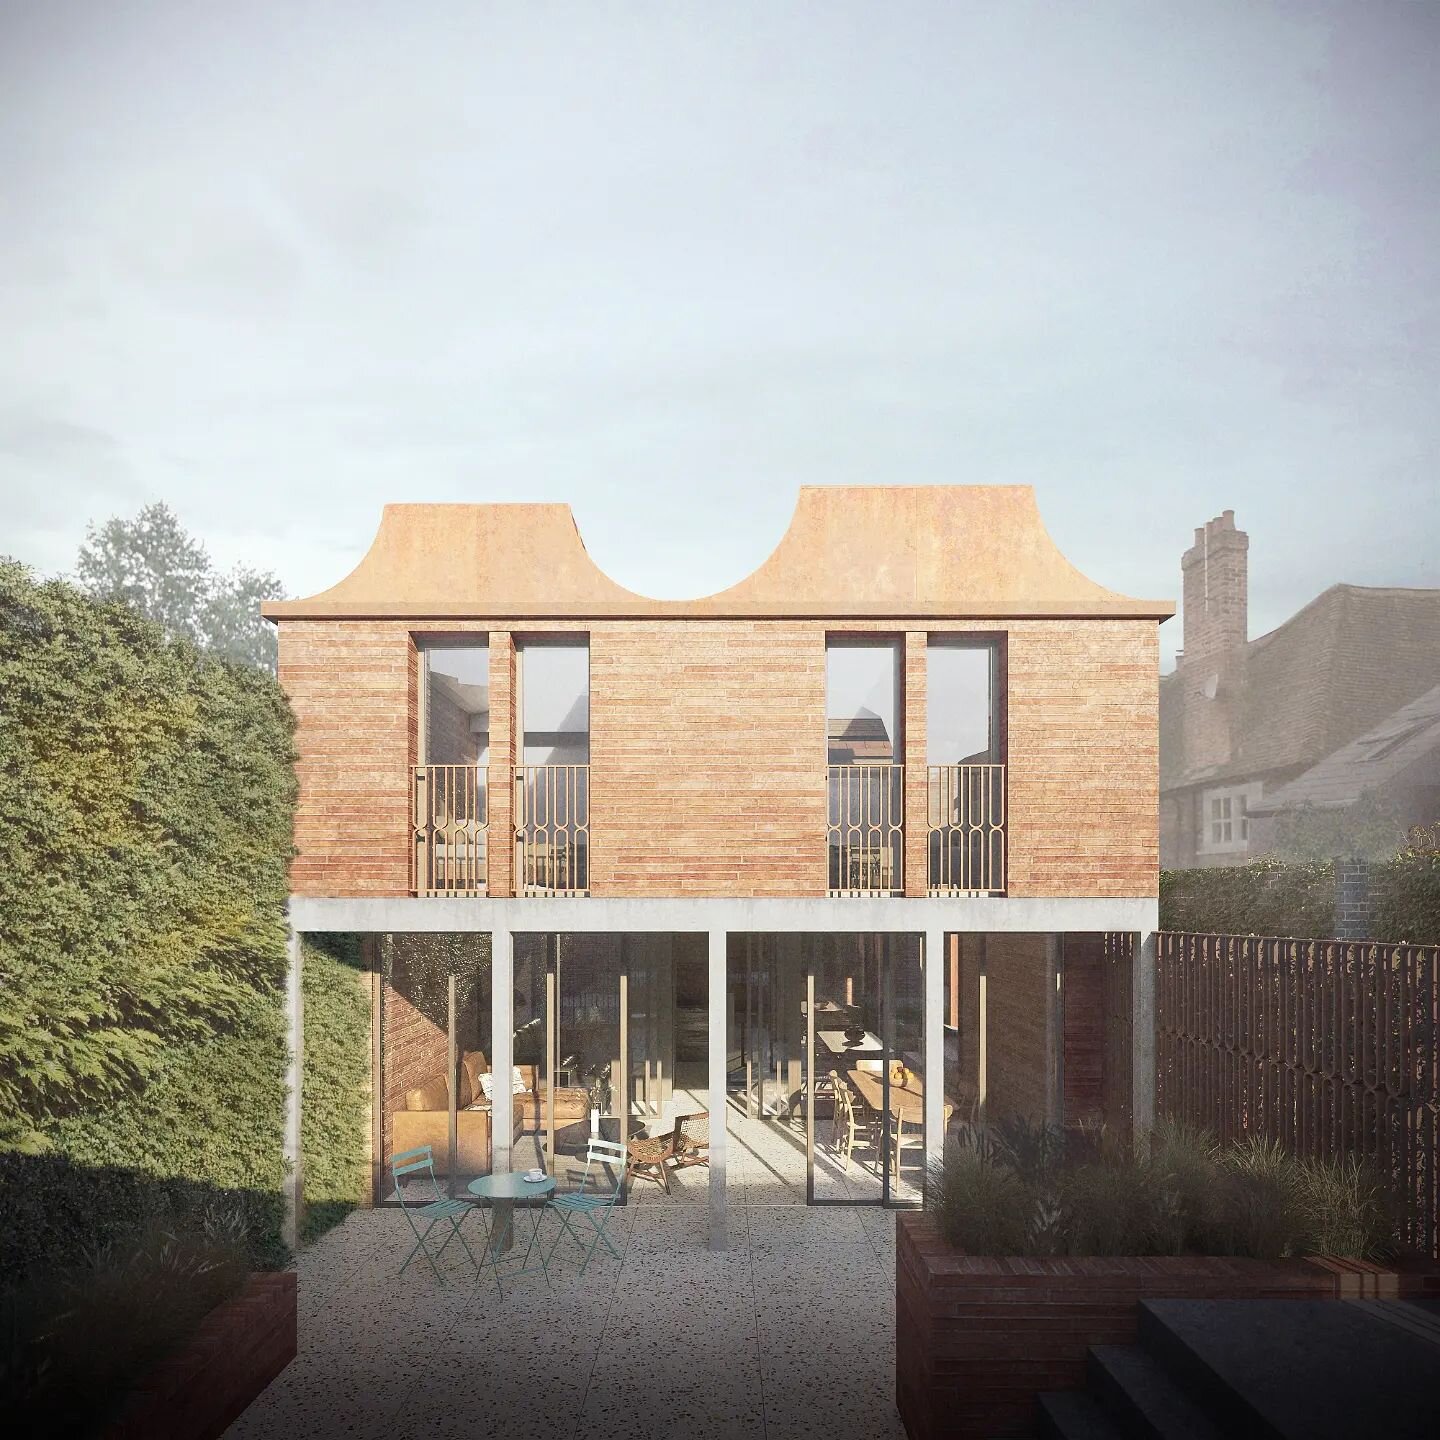 This has been an exciting infill project which has required some careful responses to a number of constraints.

This view highlights the covered outdoor area which as well as being an architectural feature allowed us to maximise the garden size whils